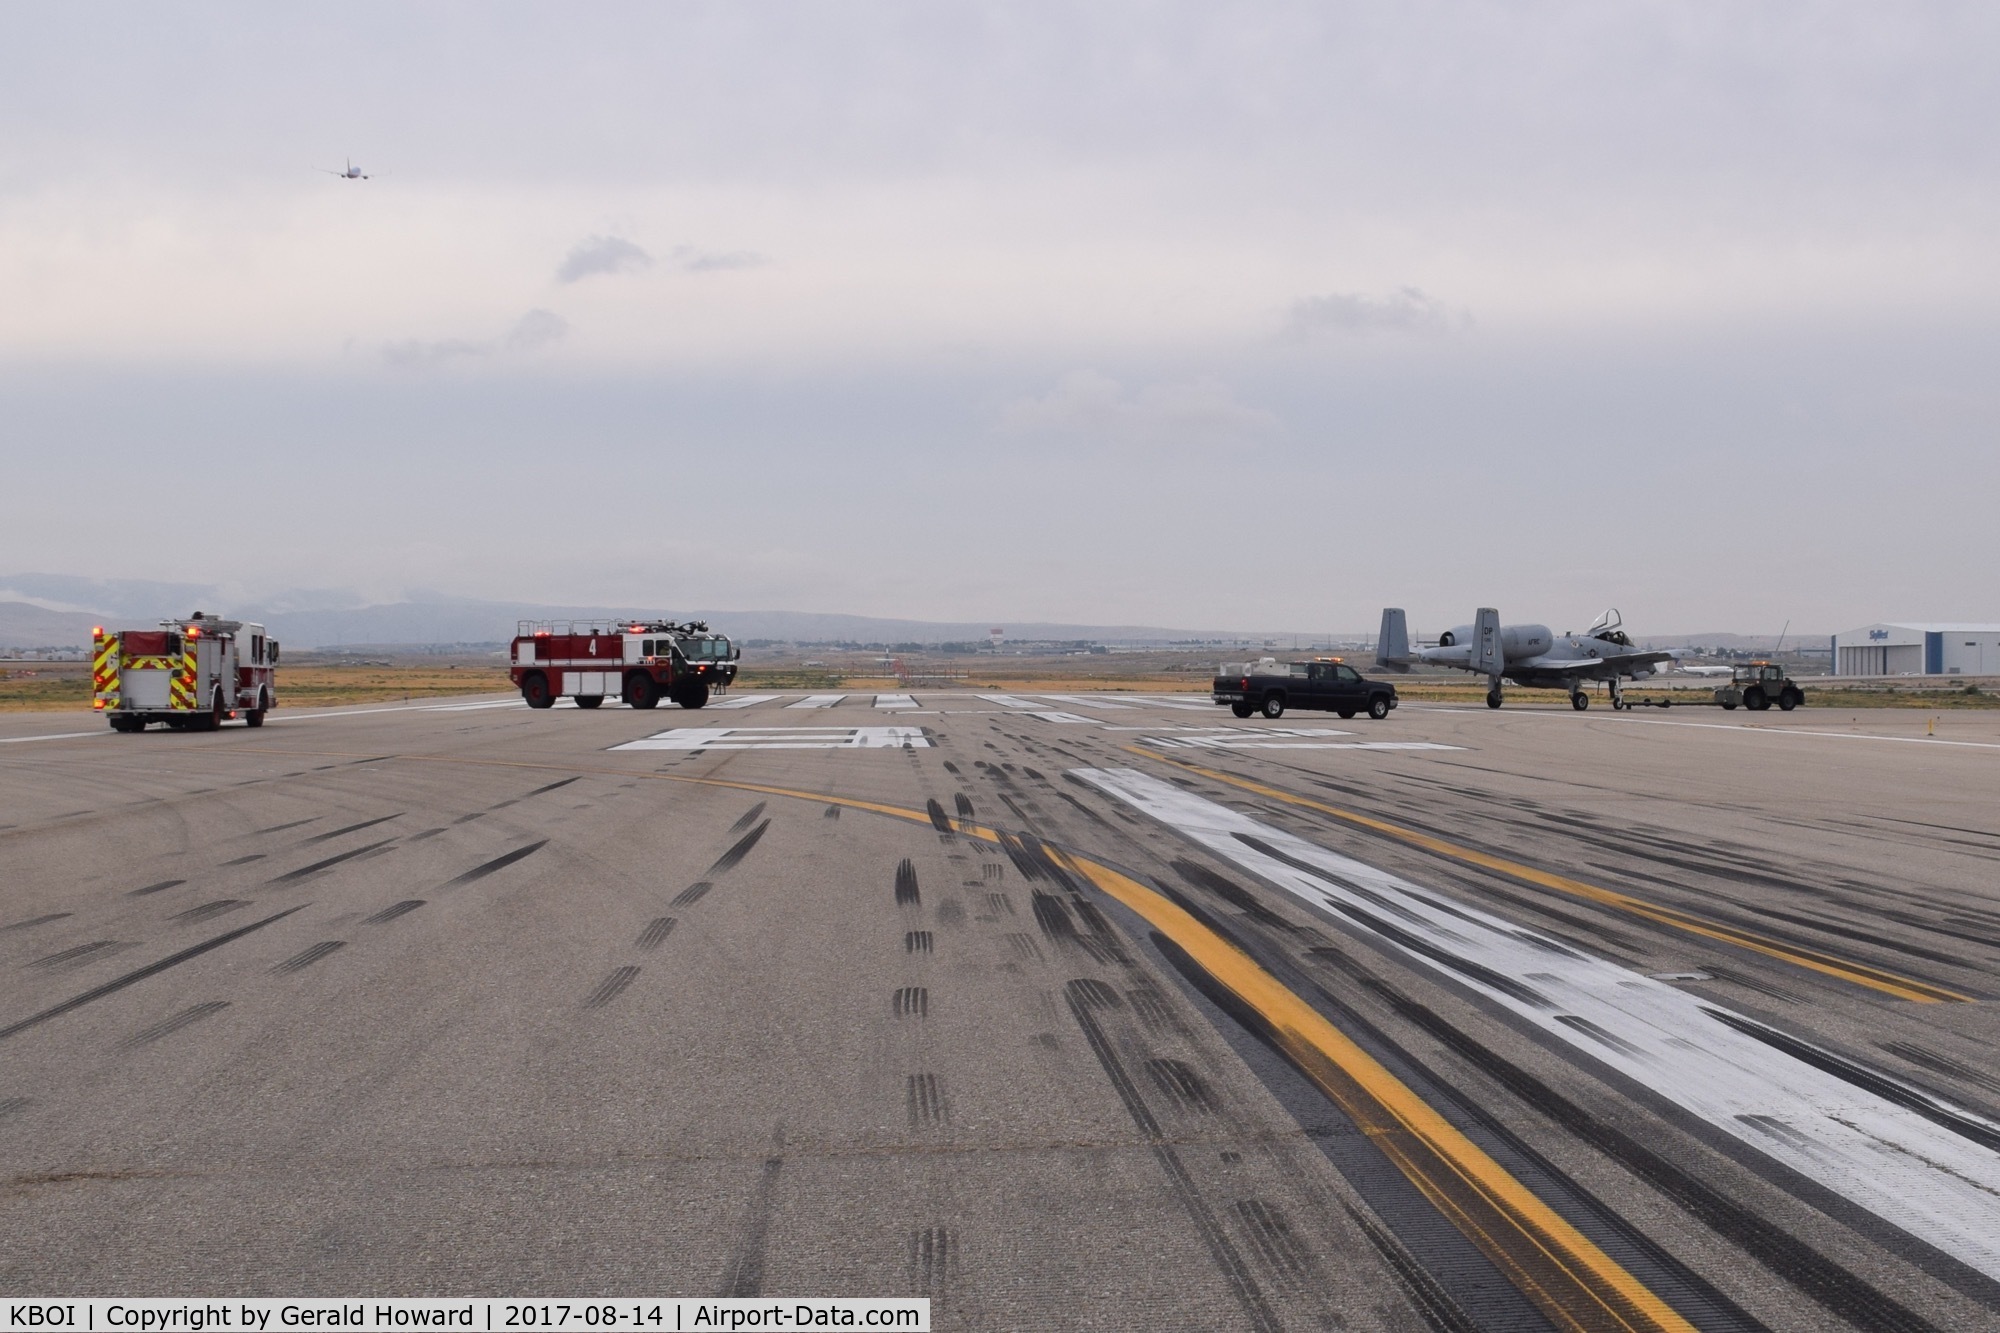 Boise Air Terminal/gowen Fld Airport (BOI) - Disabled A-10 being towed off runway followed by emergency equipment.